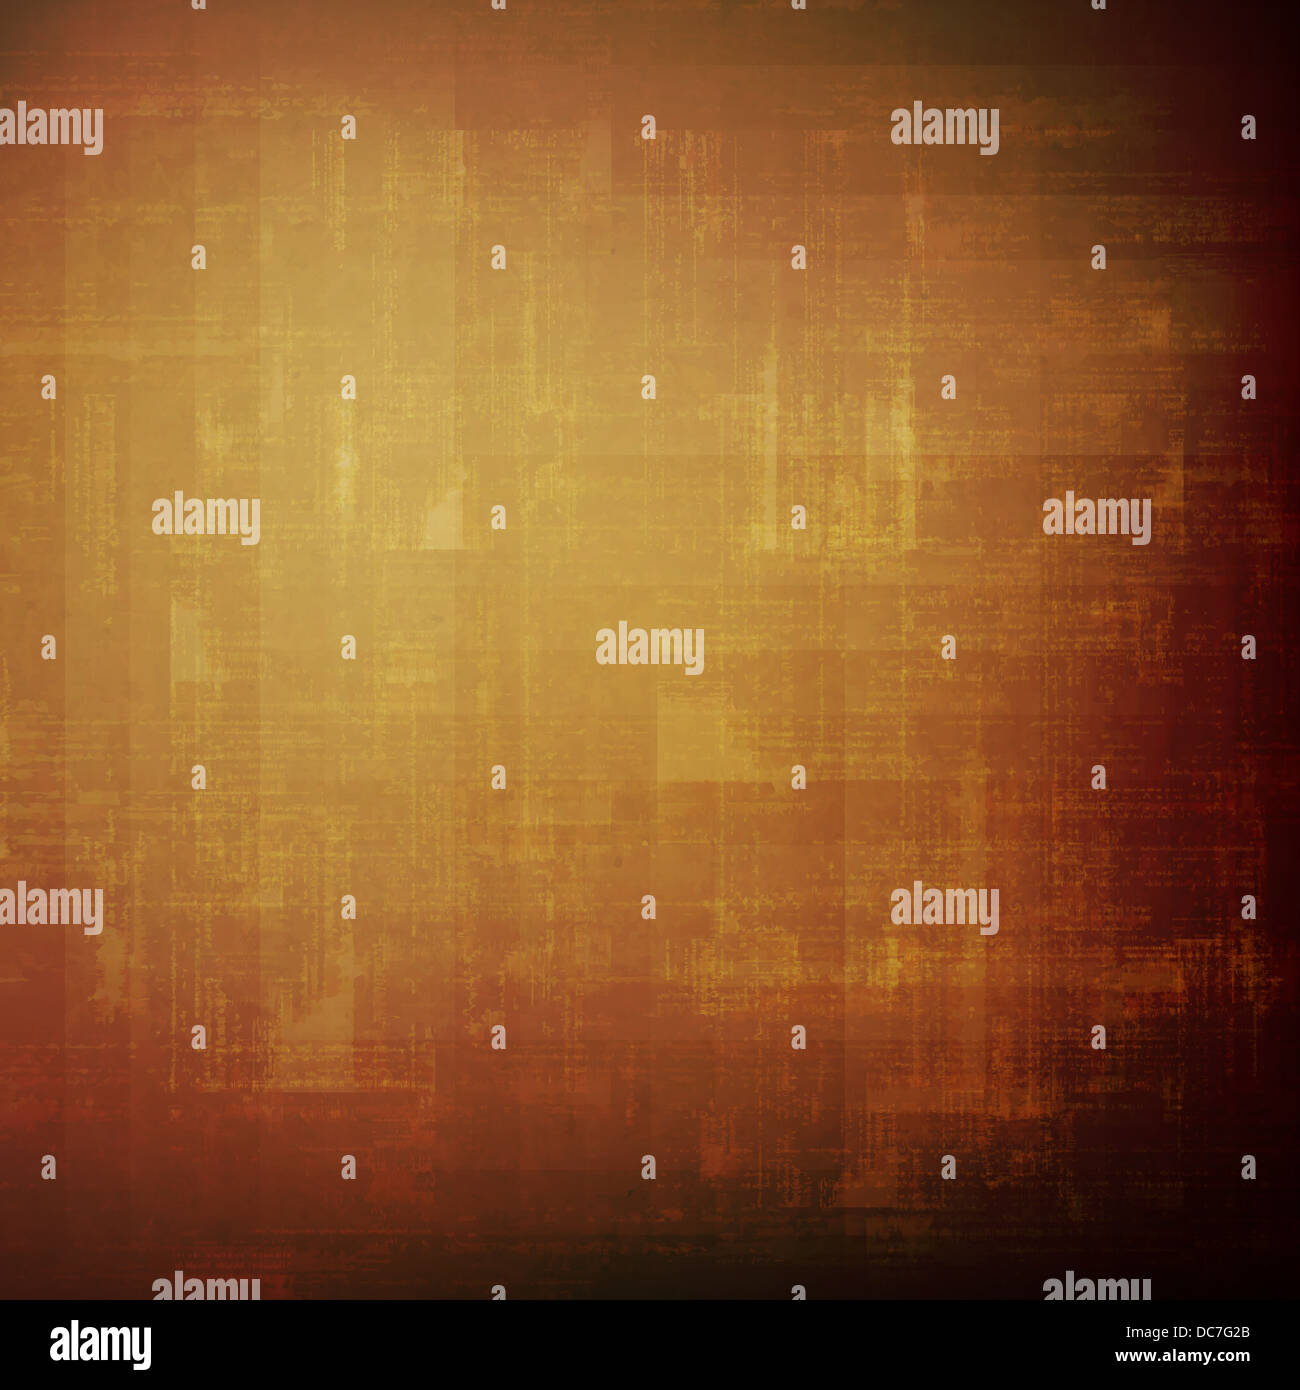 new textured surface can use like abstract grunge background Stock Photo